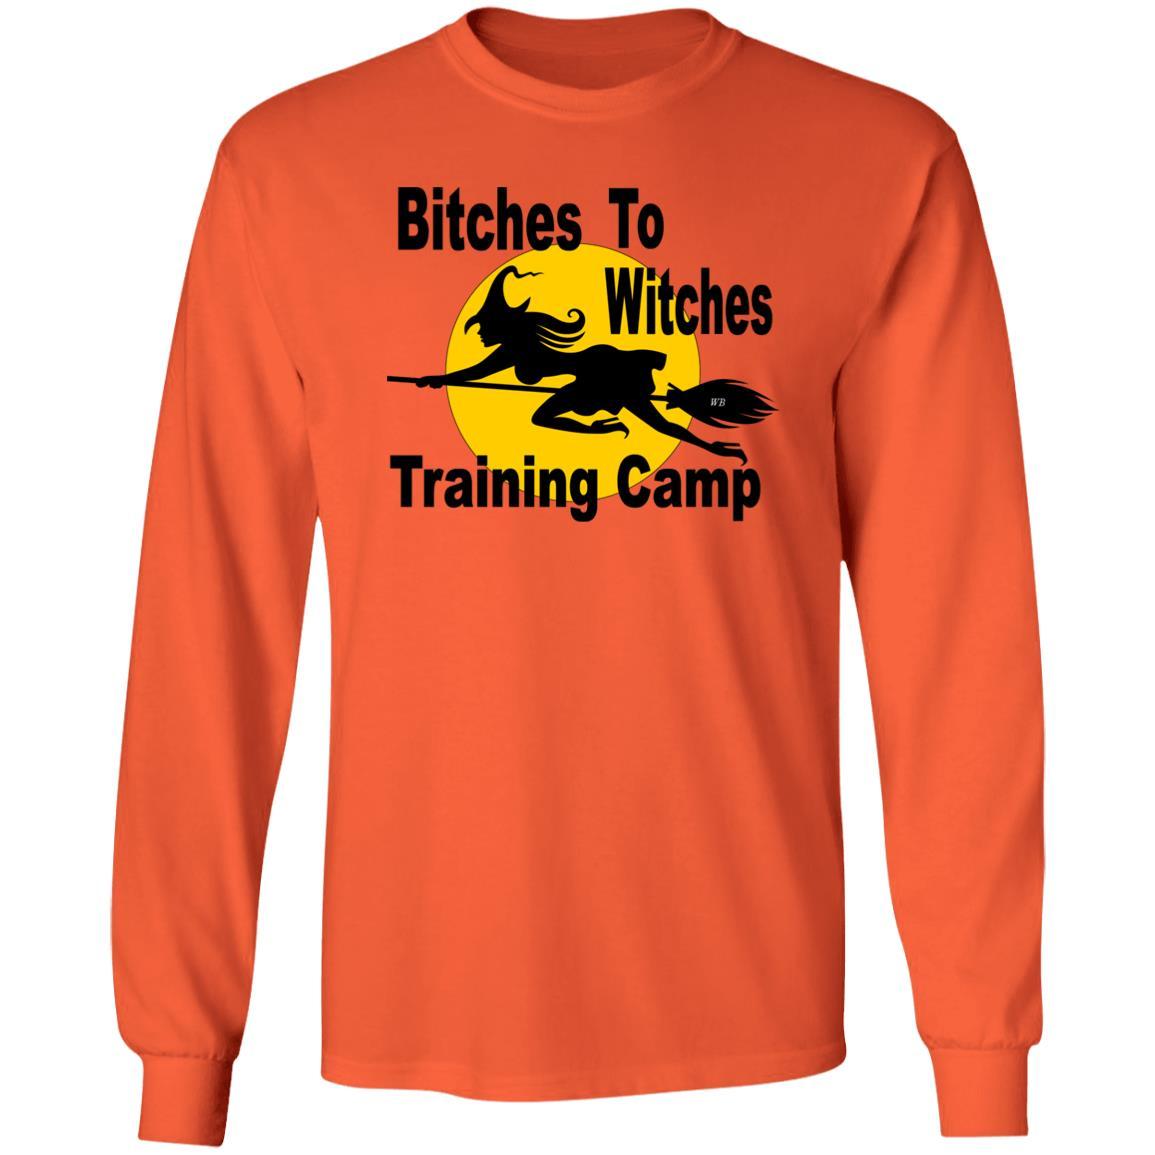 T-Shirts Orange / S WineyBitches.Co "Bitches To Witches Training Camp" LS Ultra Cotton T-Shirt WineyBitchesCo